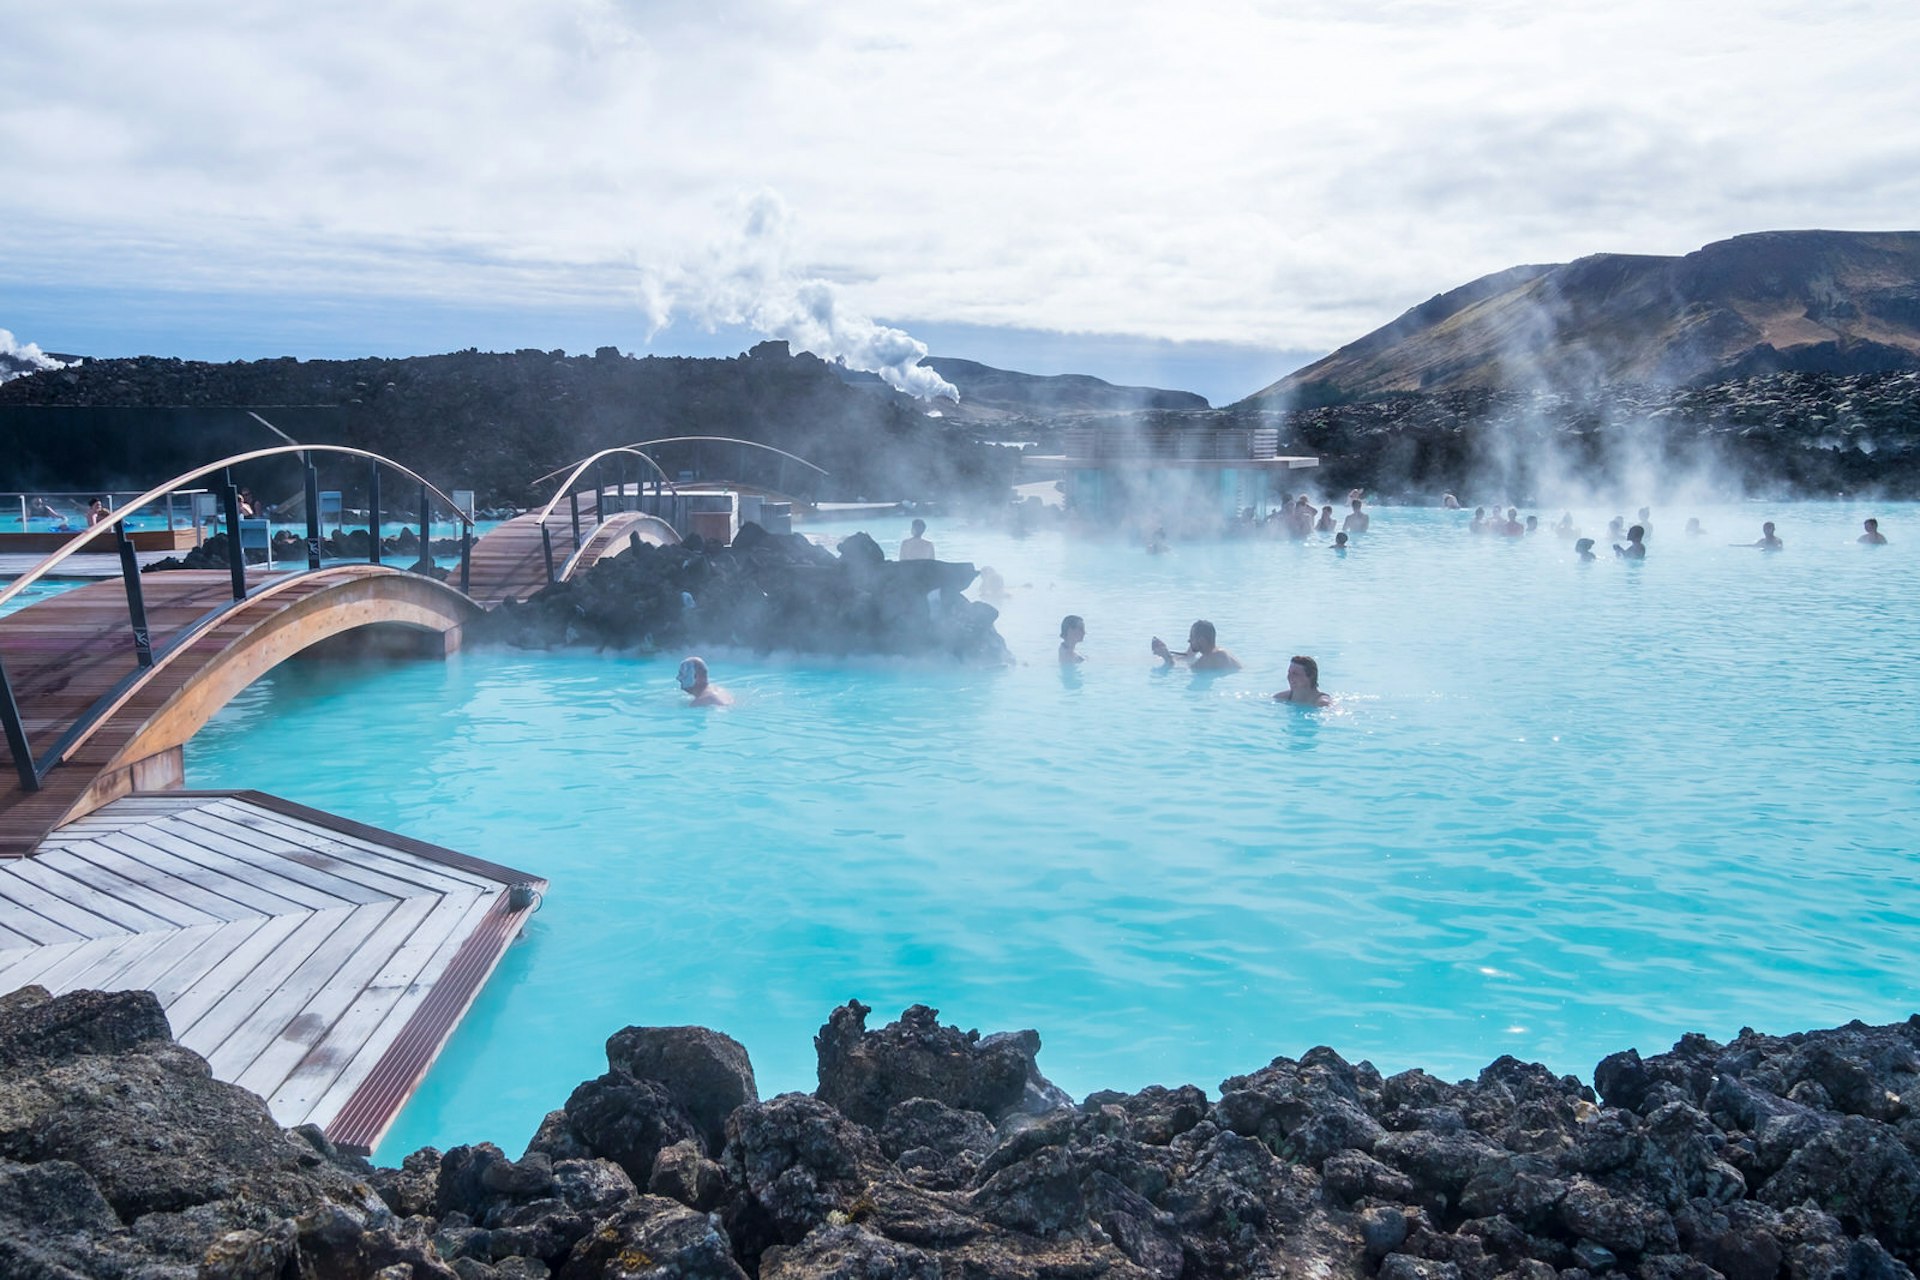 The Blue Lagoon is the most famous geological attraction in Iceland but there are many others © Puripat Lertpunyaroj / Shutterstock